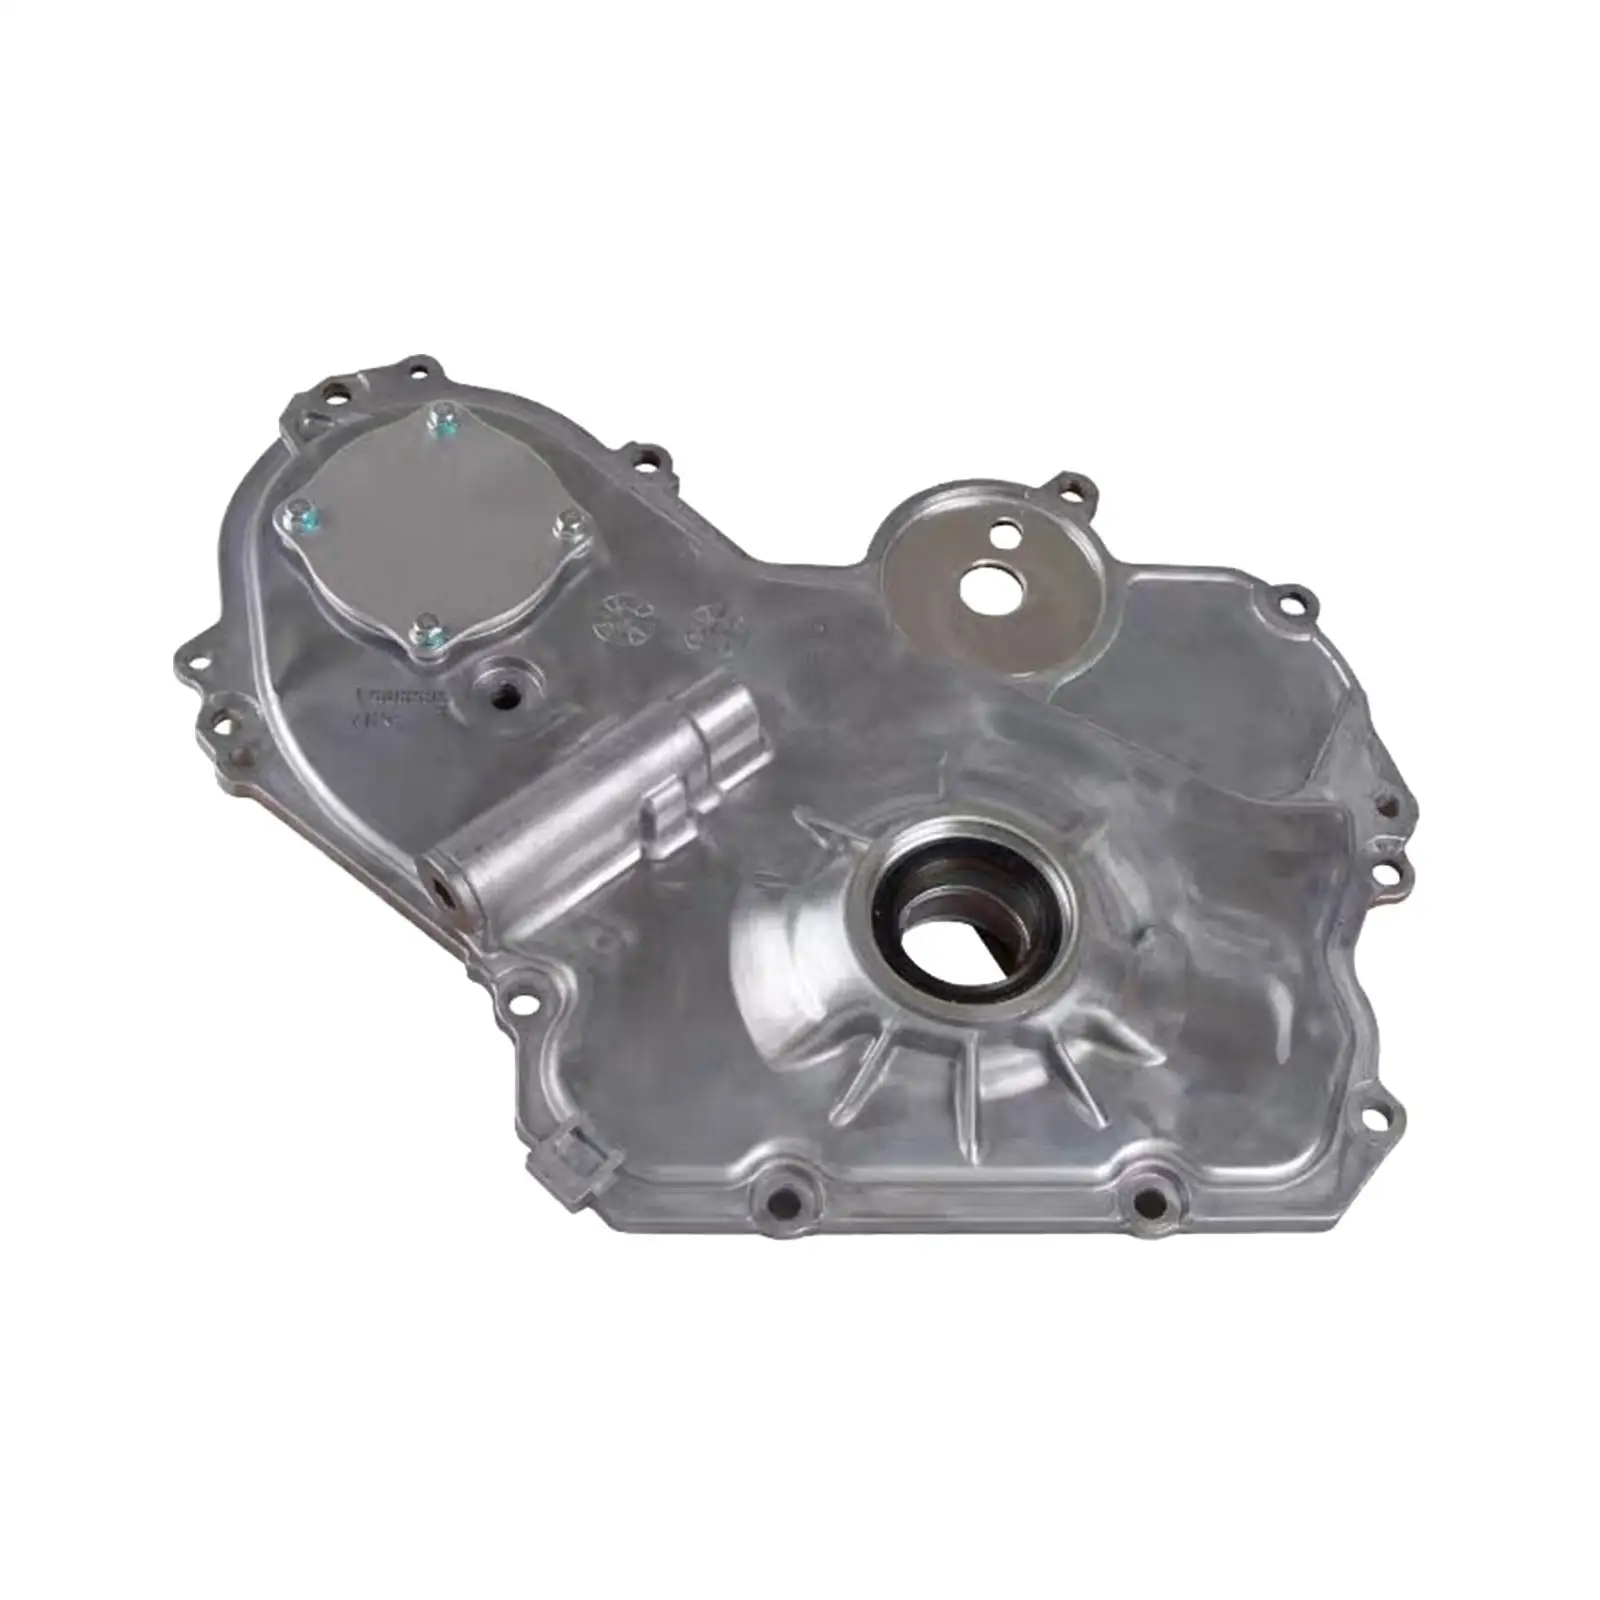 Engine Timing Cover with Oil Pump for Saturn Aura Ion L100 L200 L300 LS LS1 Lw1 Lw200